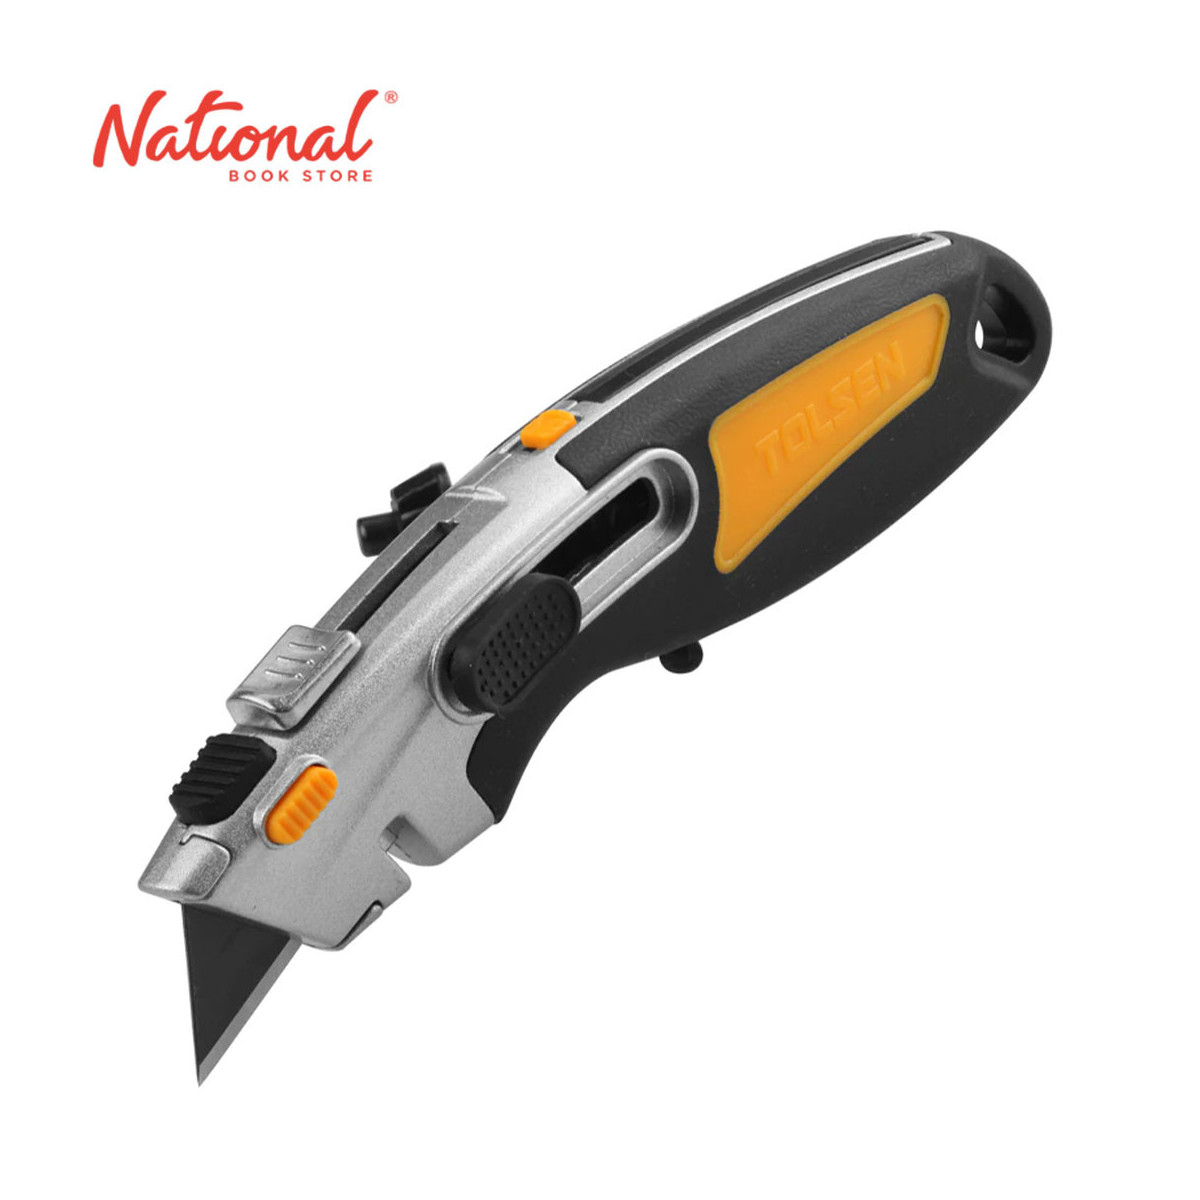 Tolsen Heavy Duty Cutter Big Double Function Utility Knife Industrial 30019 61x19mm Office Supplies